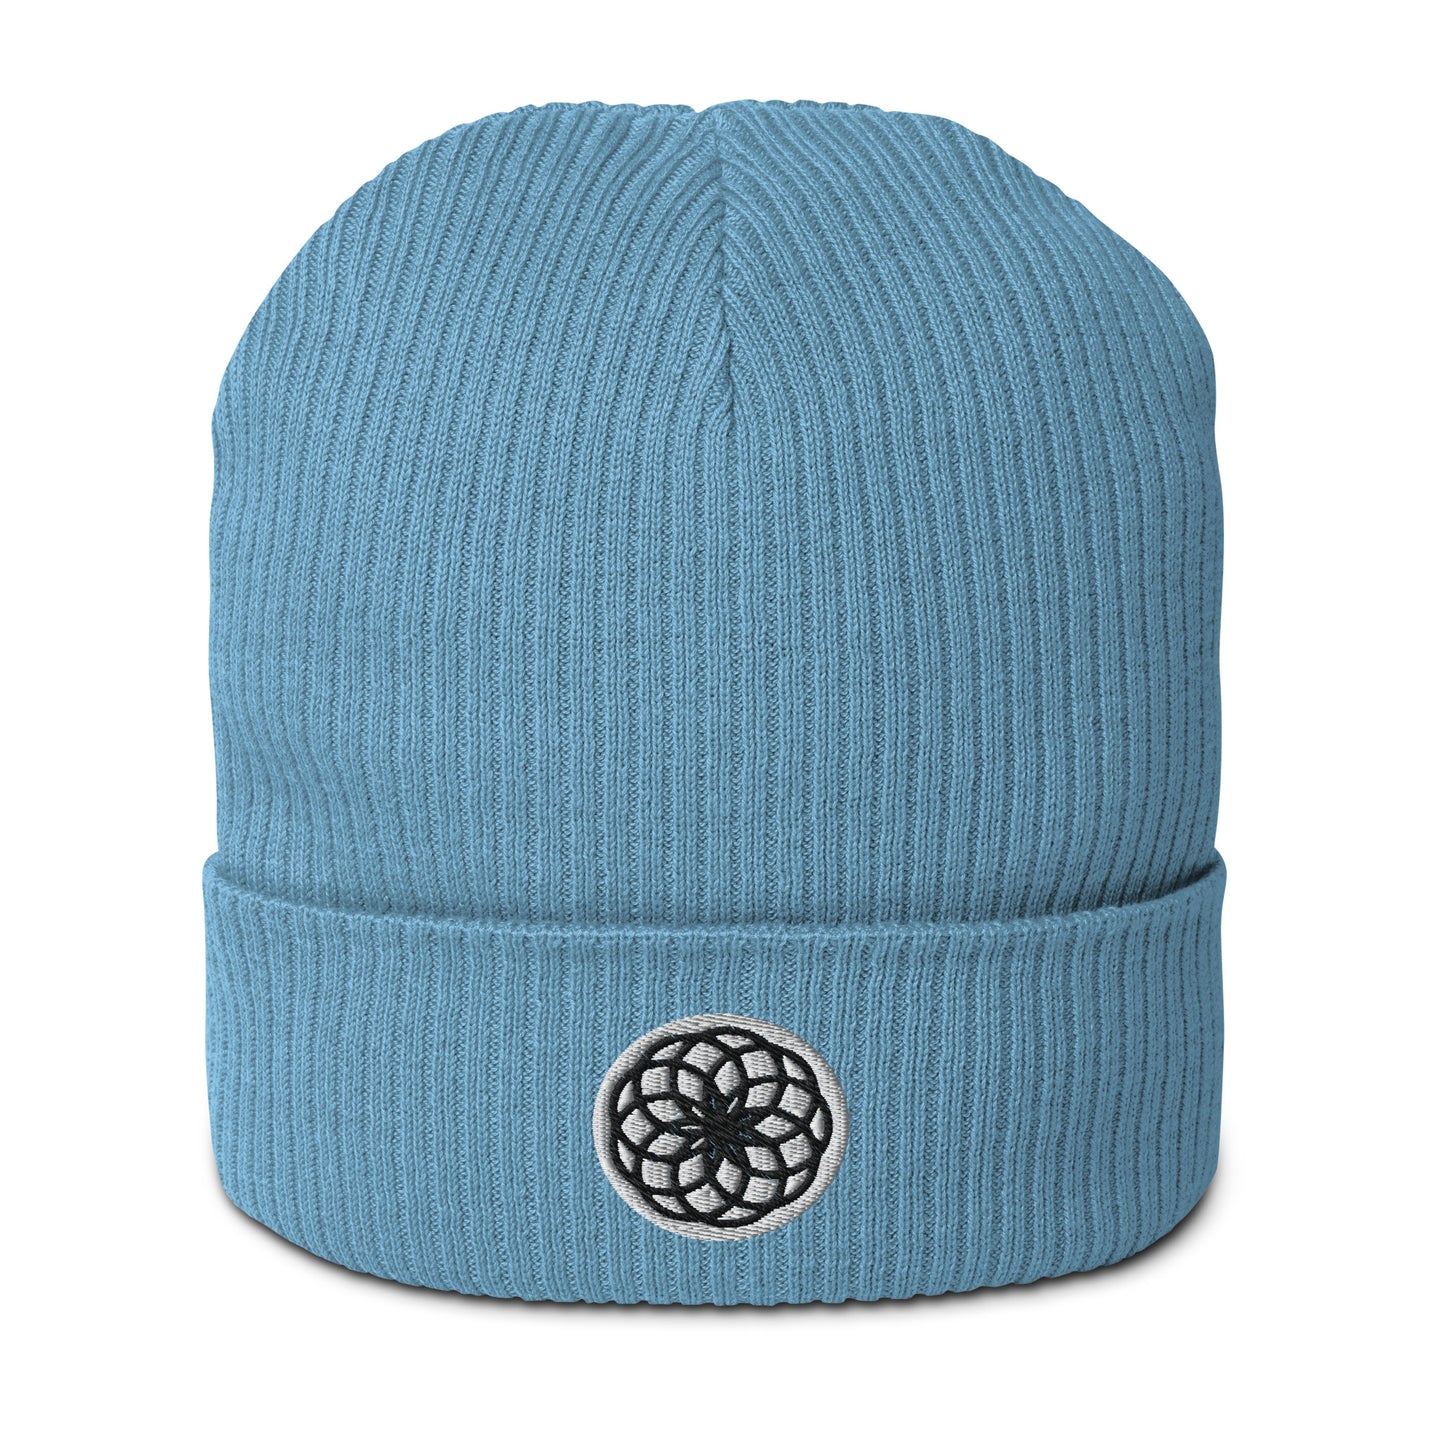 Check out our Organic Cotton Lotus of Life Beanie in Bermuda Blue. Made from organic cotton and featuring a Lotus of Life embroidery, it's not your average hat. It's about purity, growth, and embracing life. Plus, it's made of breathable and lightweight natural fabric, so you can stay comfy wherever your journey takes you. Grab one and add a laid-back, high vibe touch to your style.